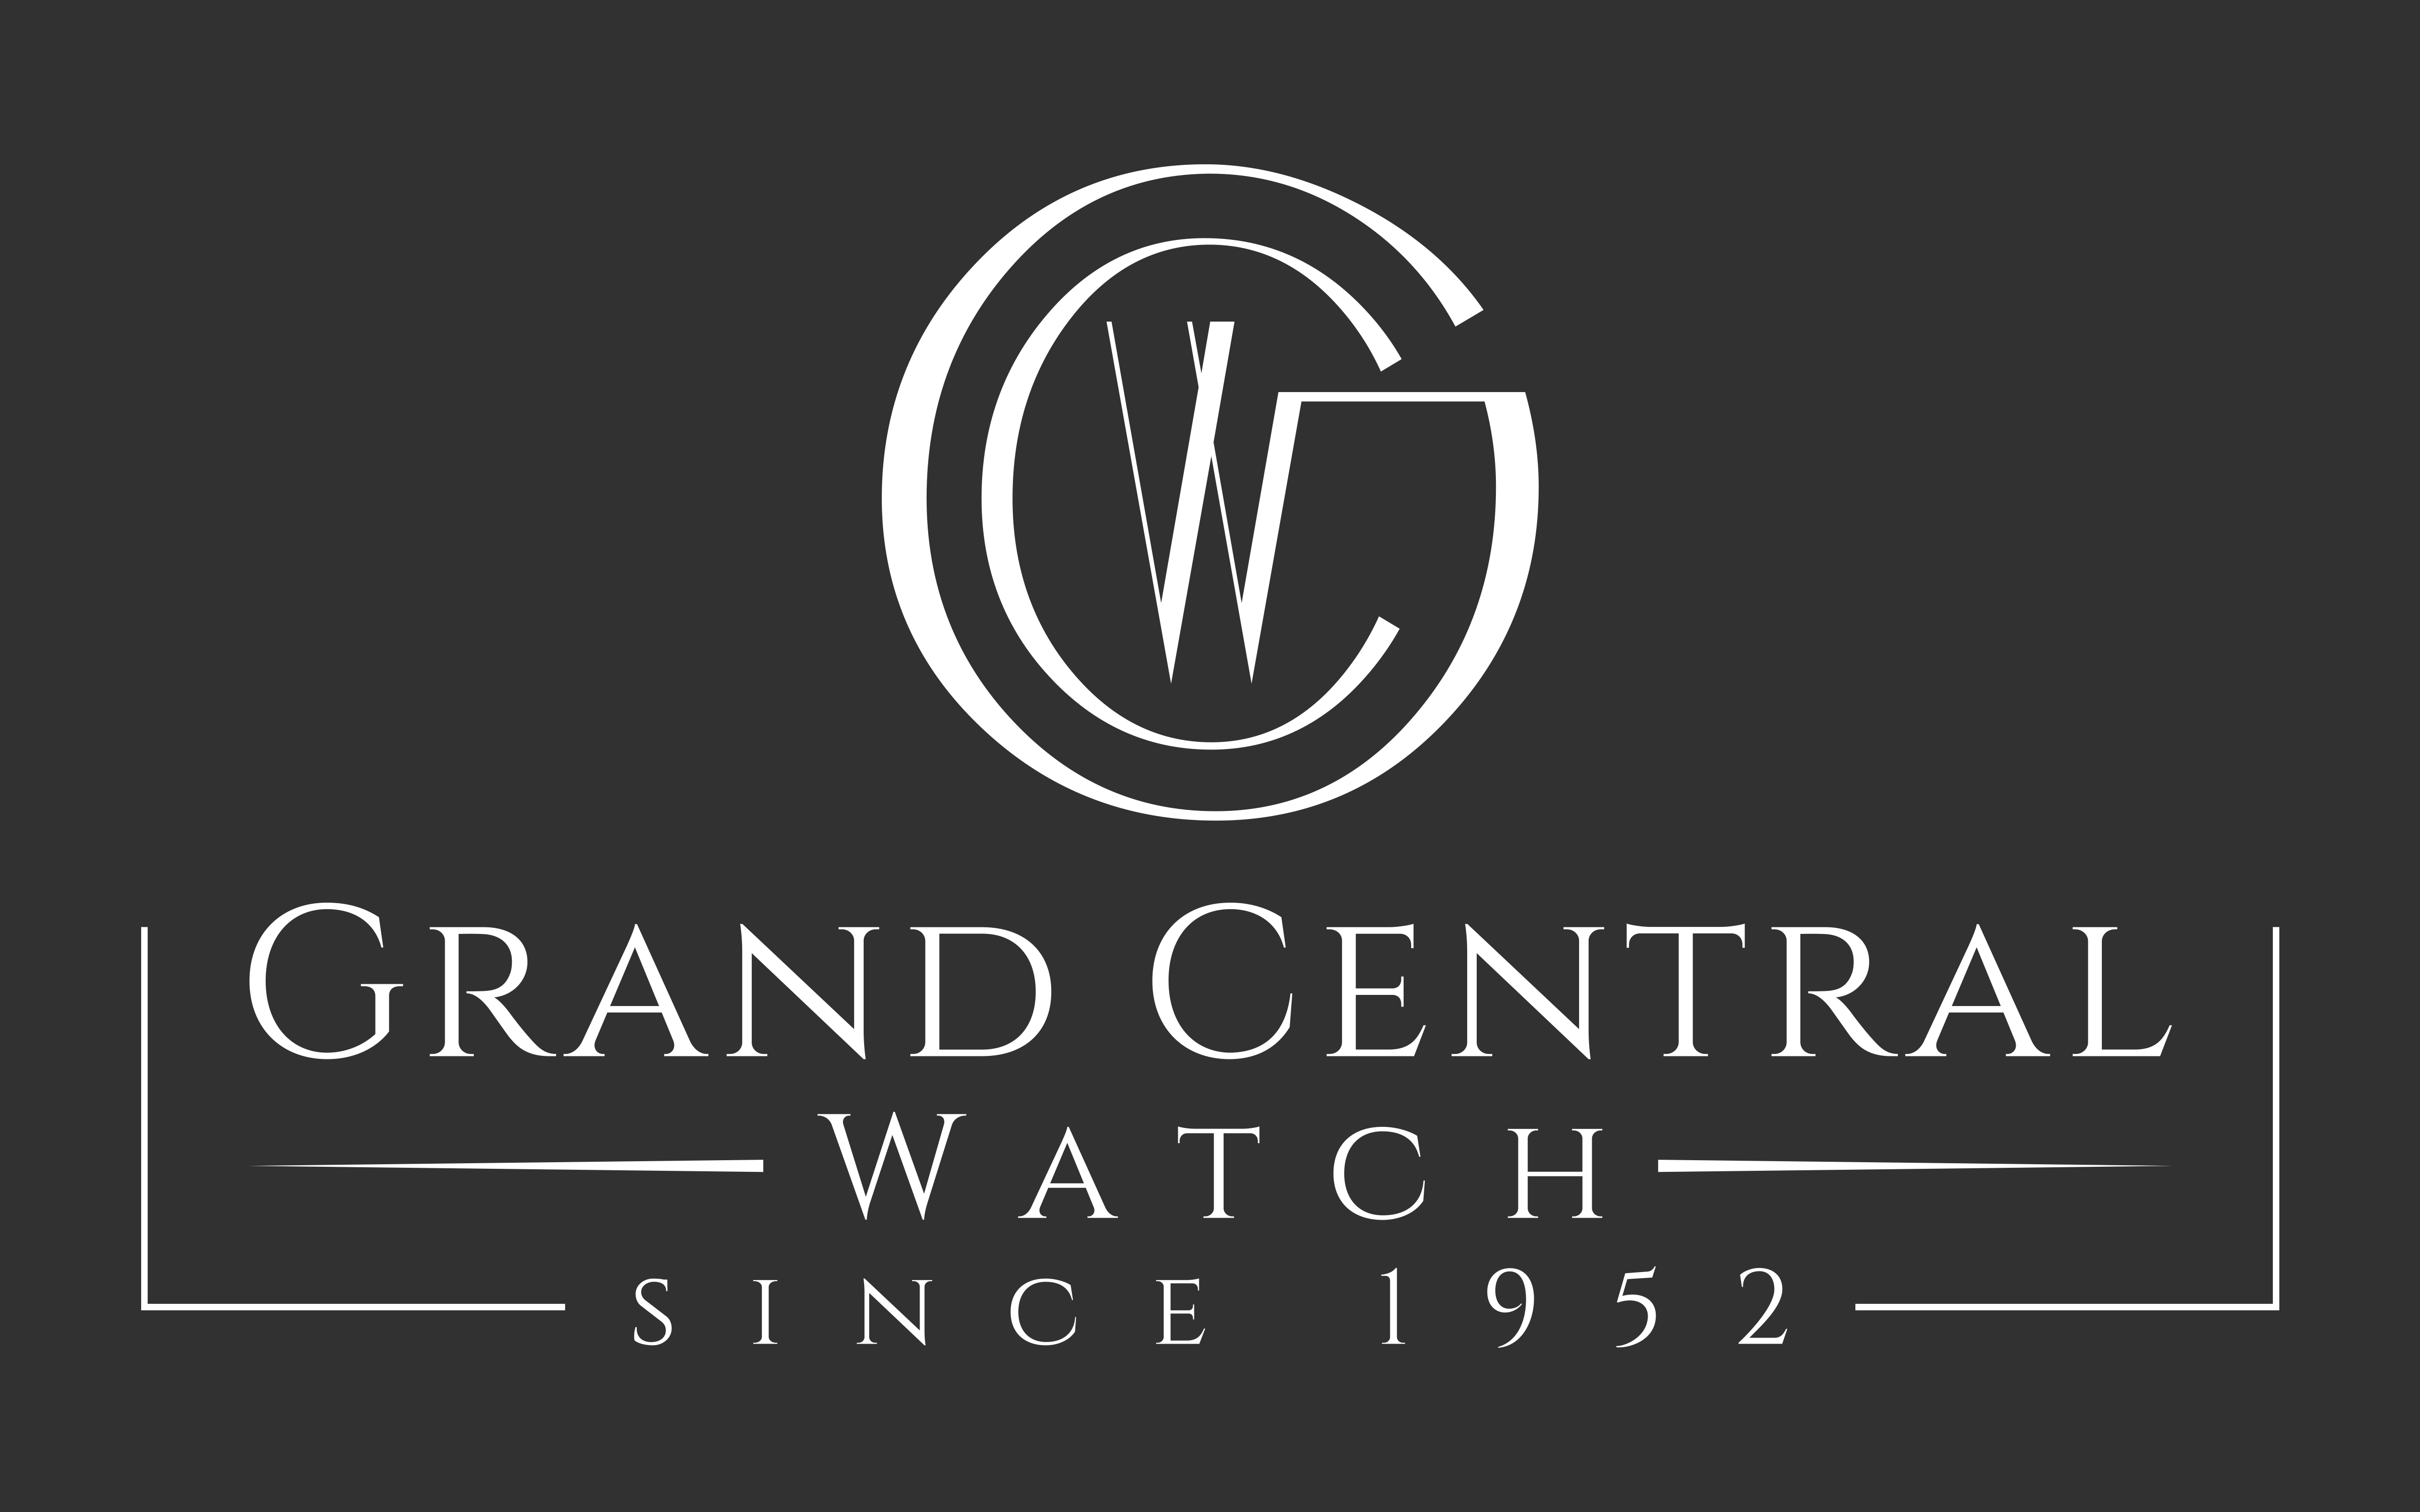 logo image for central watch